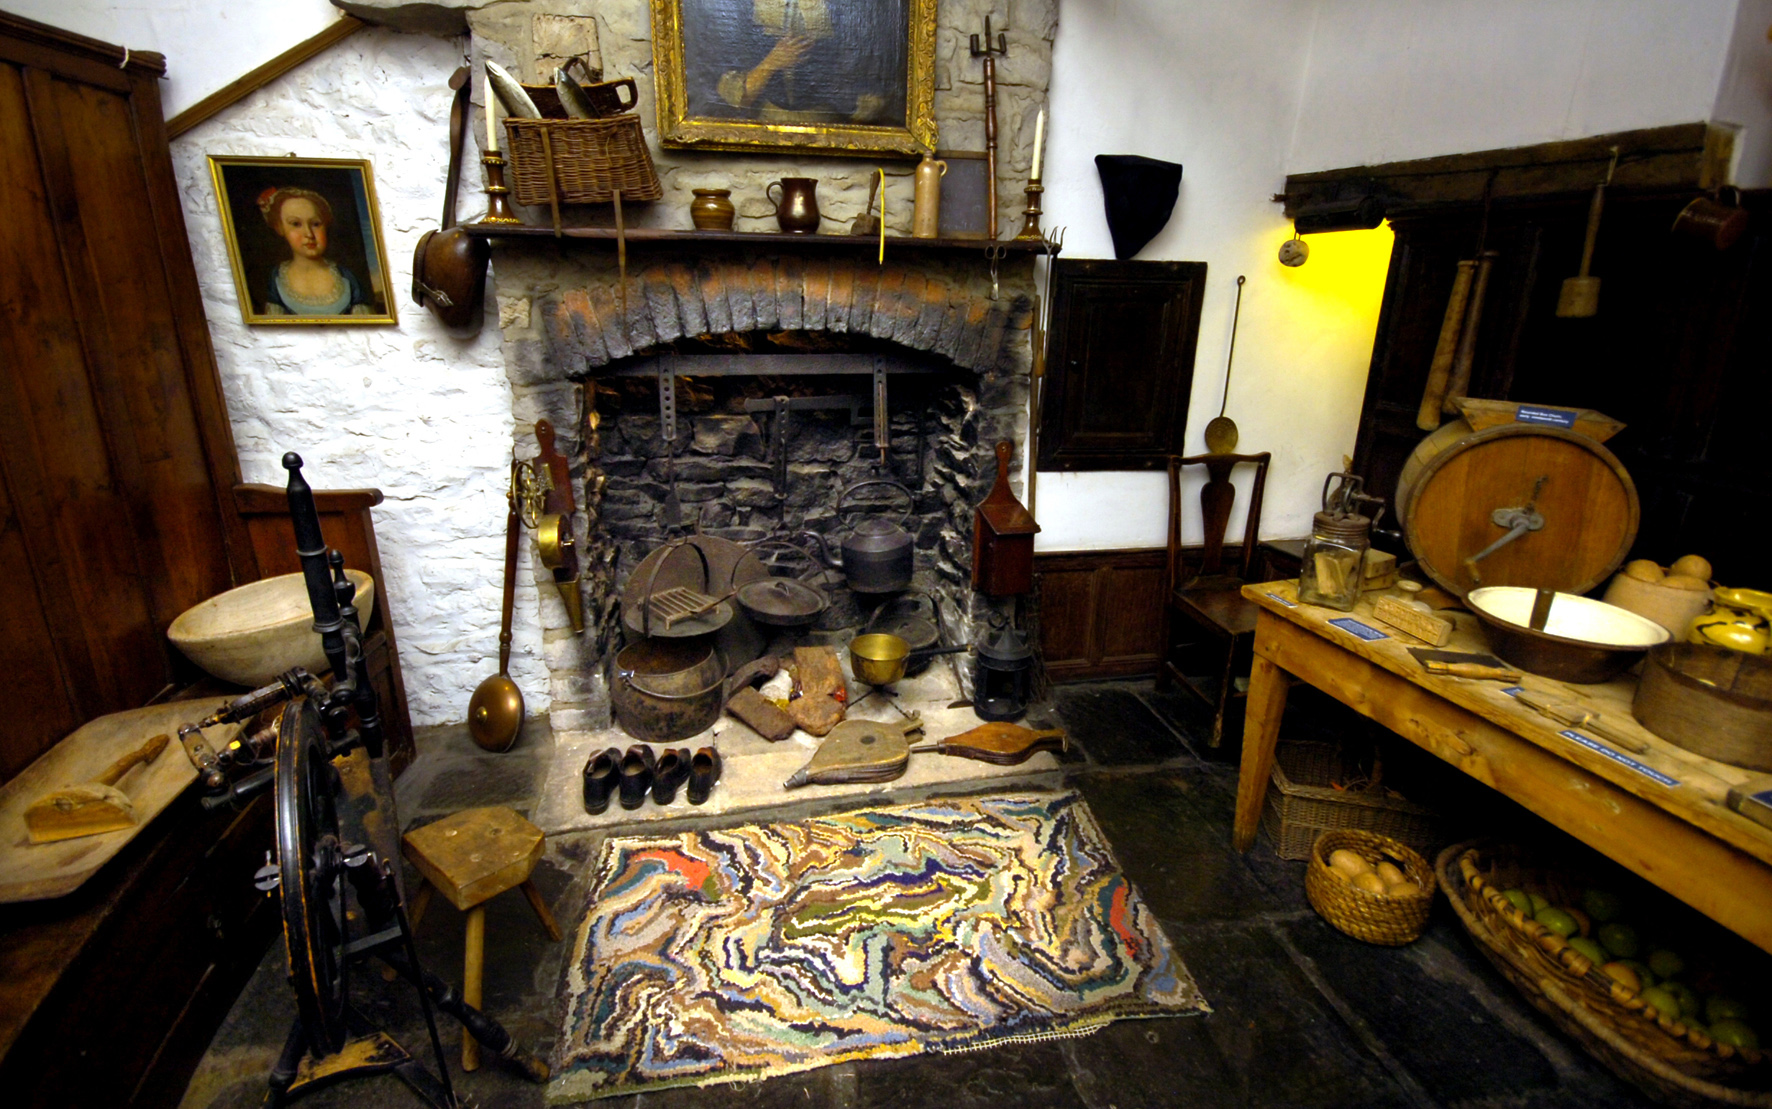 A typical Cumbrian farmhouse kitchen in the 18th centure at the Museum of Lakeland Life and Industry Kendal